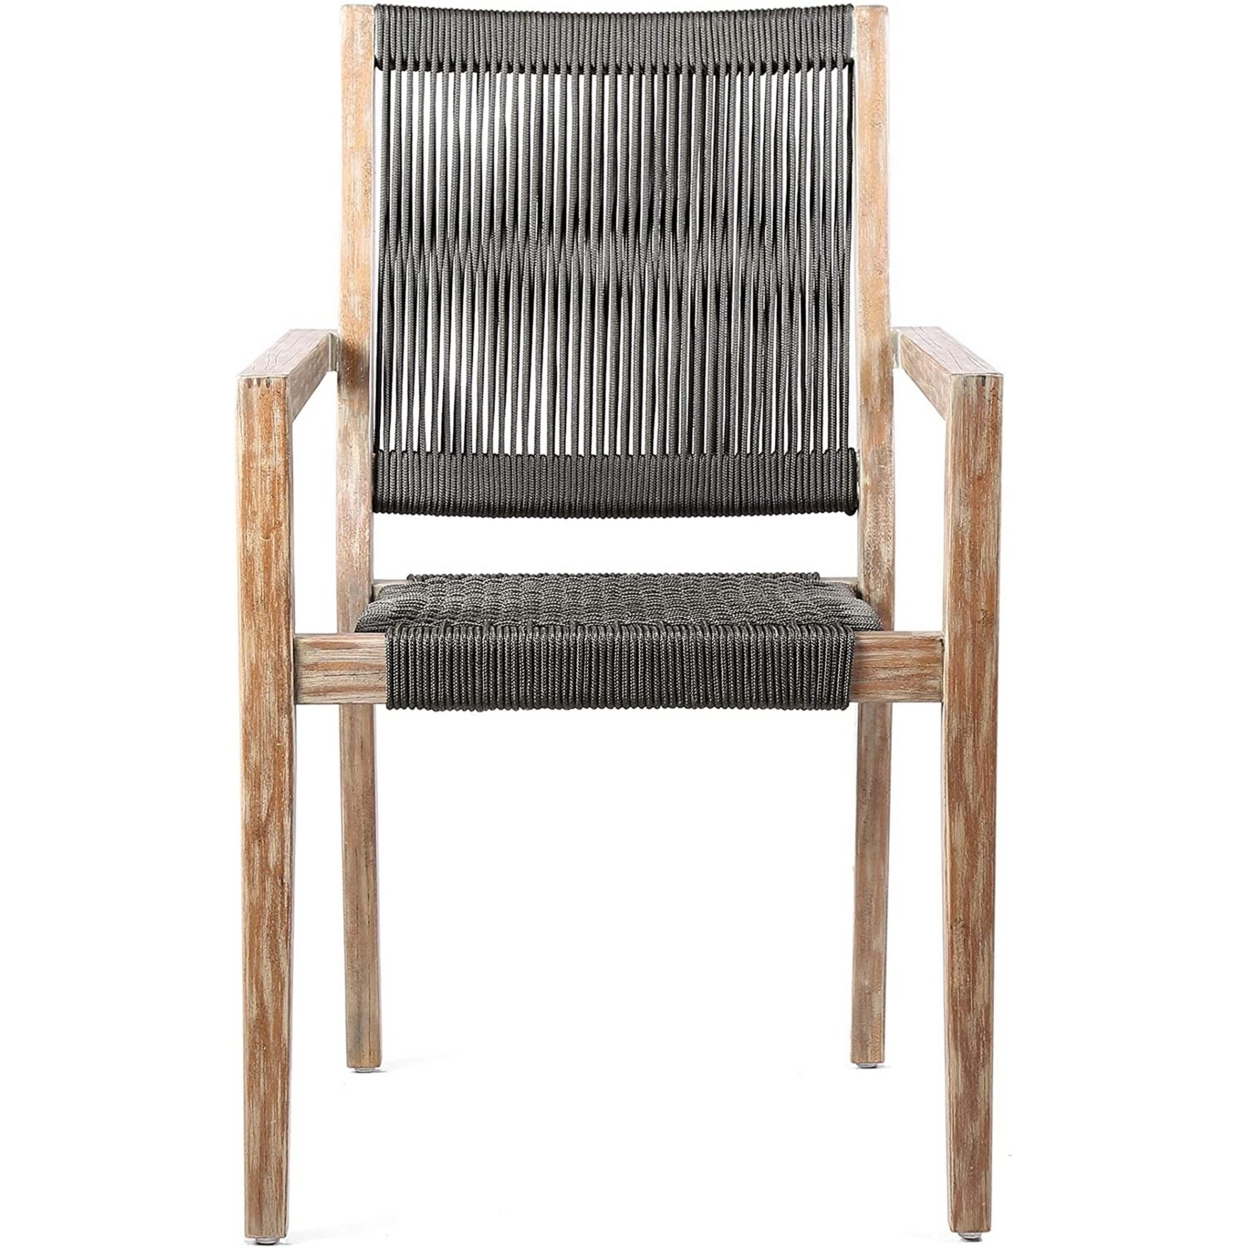 Wooden Outdoor Dining Chair With Fishbone Weave, Set Of 2, Charcoal Black- Saltoro Sherpi